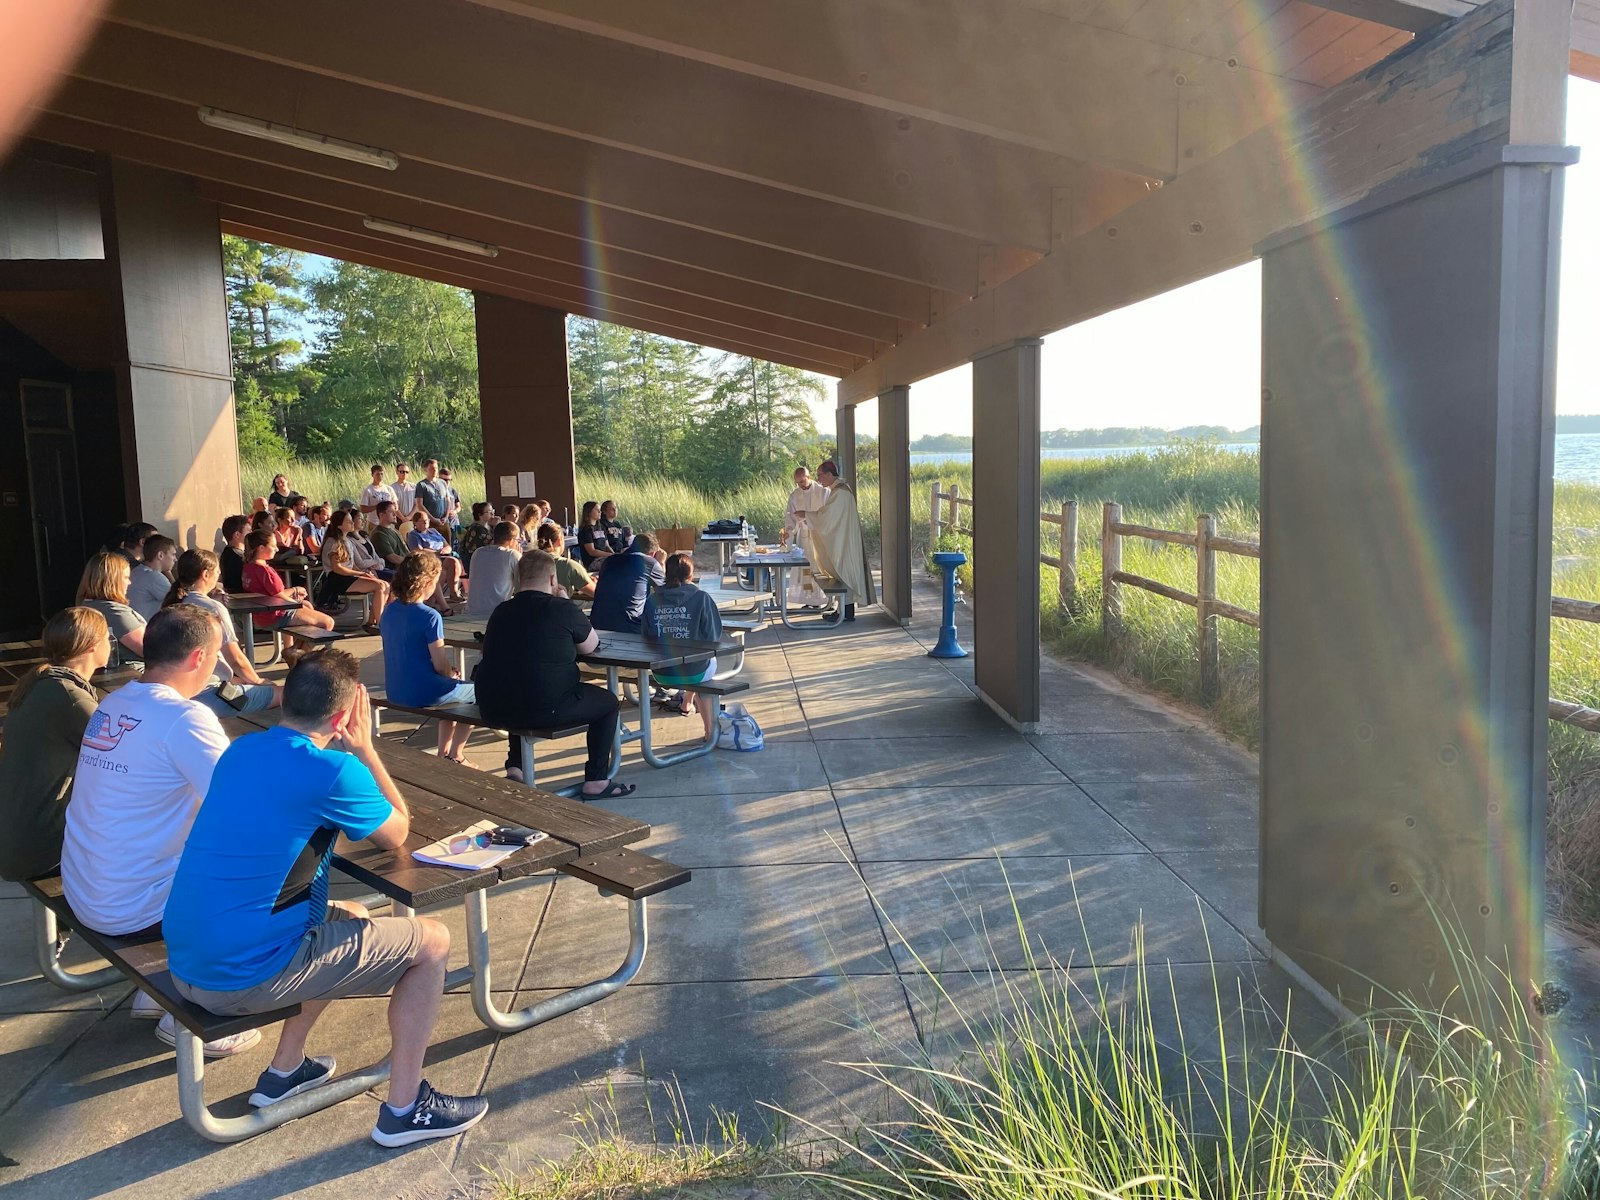 Bishop Jeffrey Walsh of Gaylord celebrates Mass in a pavilion on the shores of Lake Huron on Friday night during the Michigan Young Adult Hiking and Rafting Pilgrimage. Bishop Walsh thanked the 70 retreatants for bearing witness to Christ in his diocese.